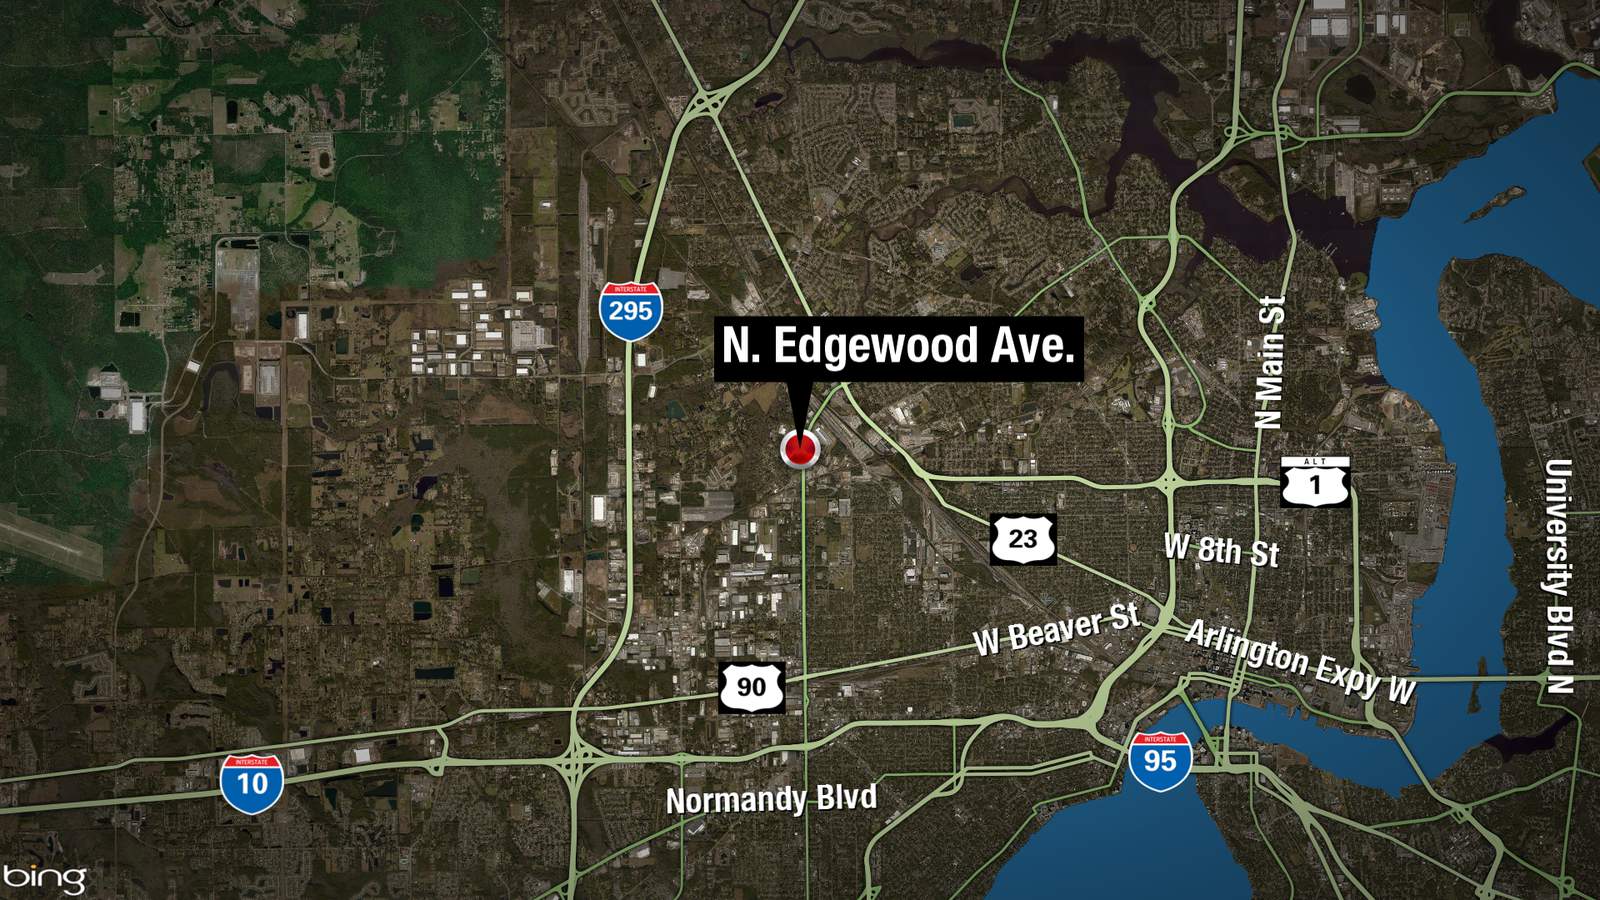 Officers find shooting victim at Edgewood Avenue gas station